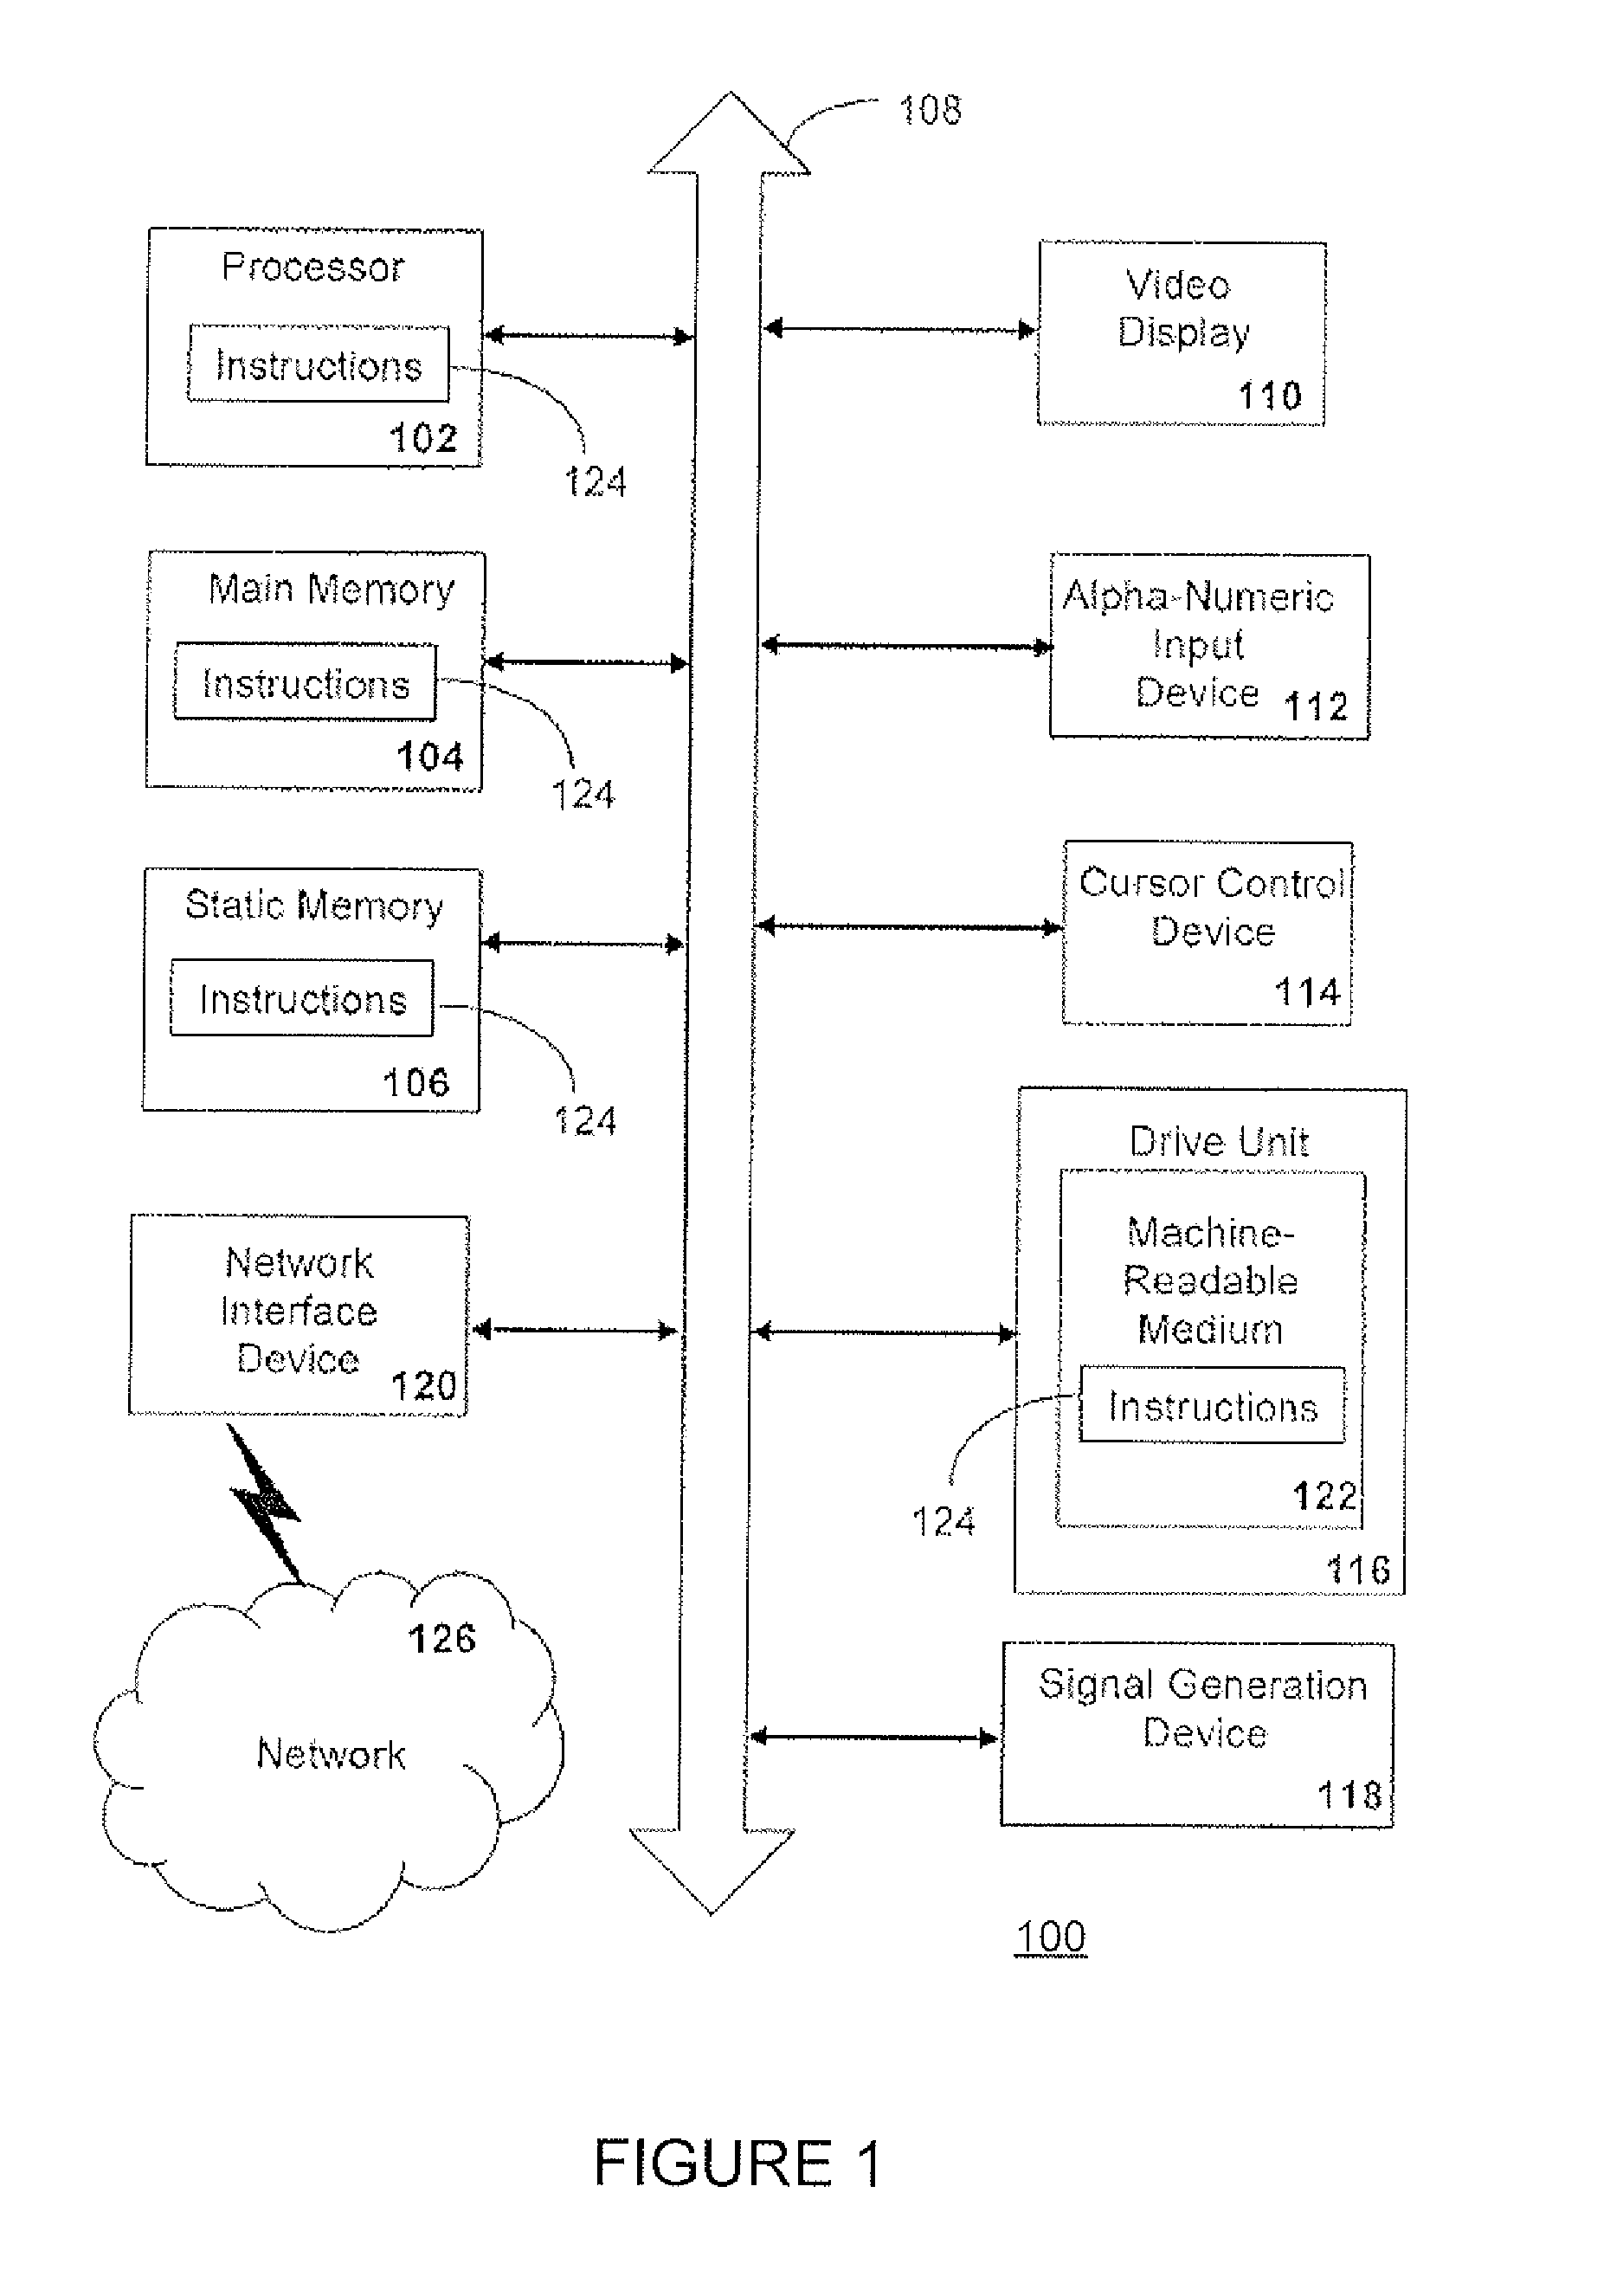 Method for n-wise registration and mosaicing of partial prints